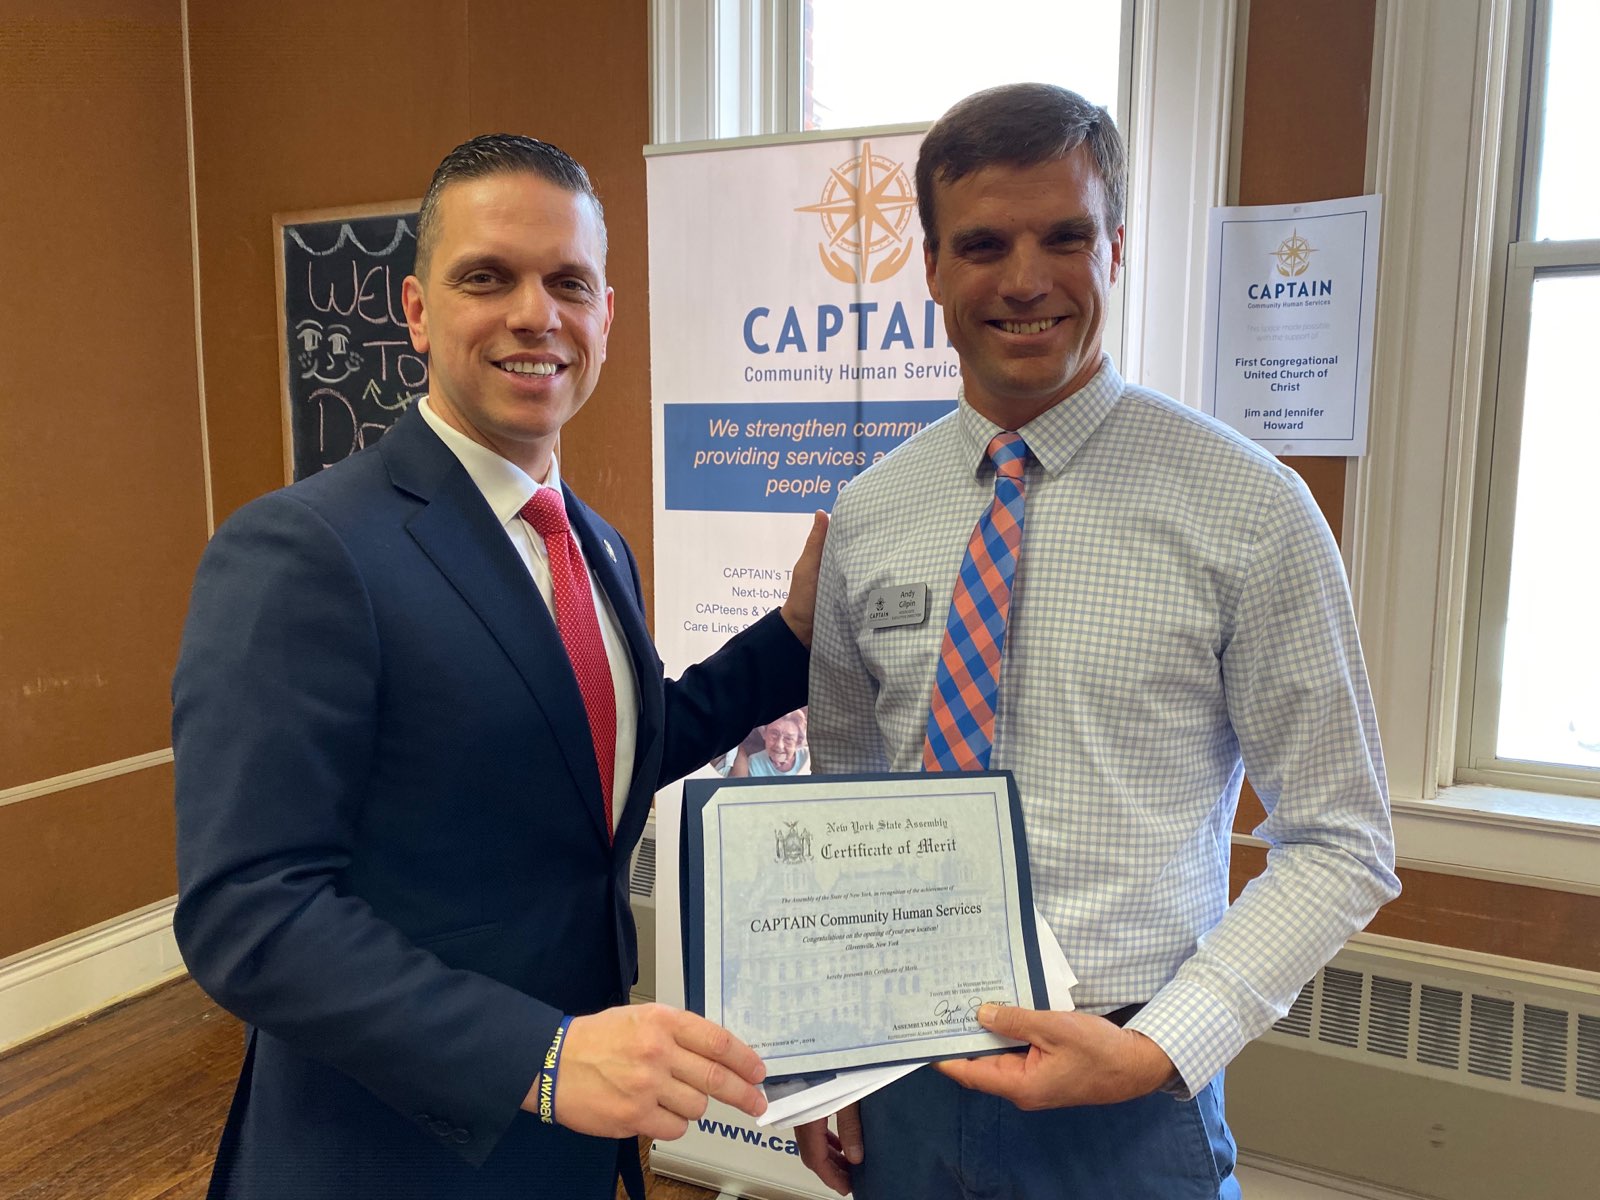 Assemblyman Santabarbara joined Andy Gilpin, Associate Executive Director of CAPTAIN Community Human Services in the City of Gloversville to announce the expansion of their services to combat homeless